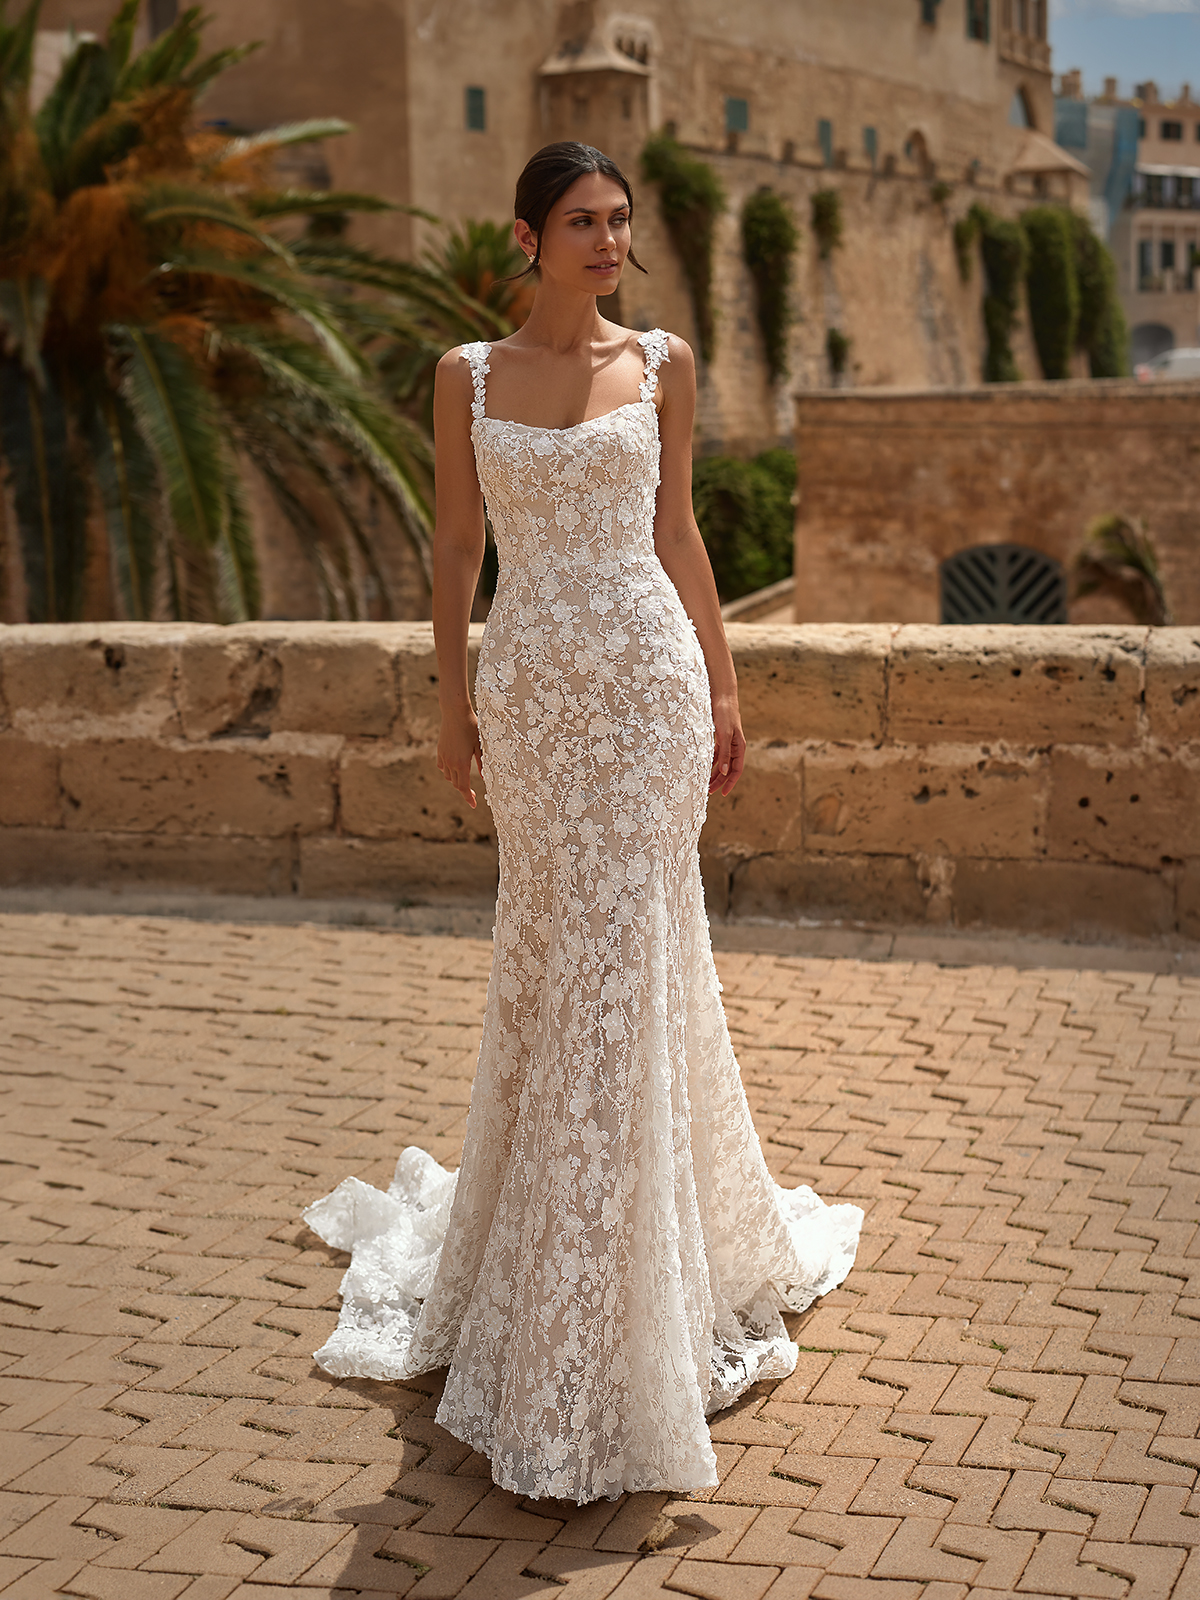 Floral wedding gown with a scoop neckline